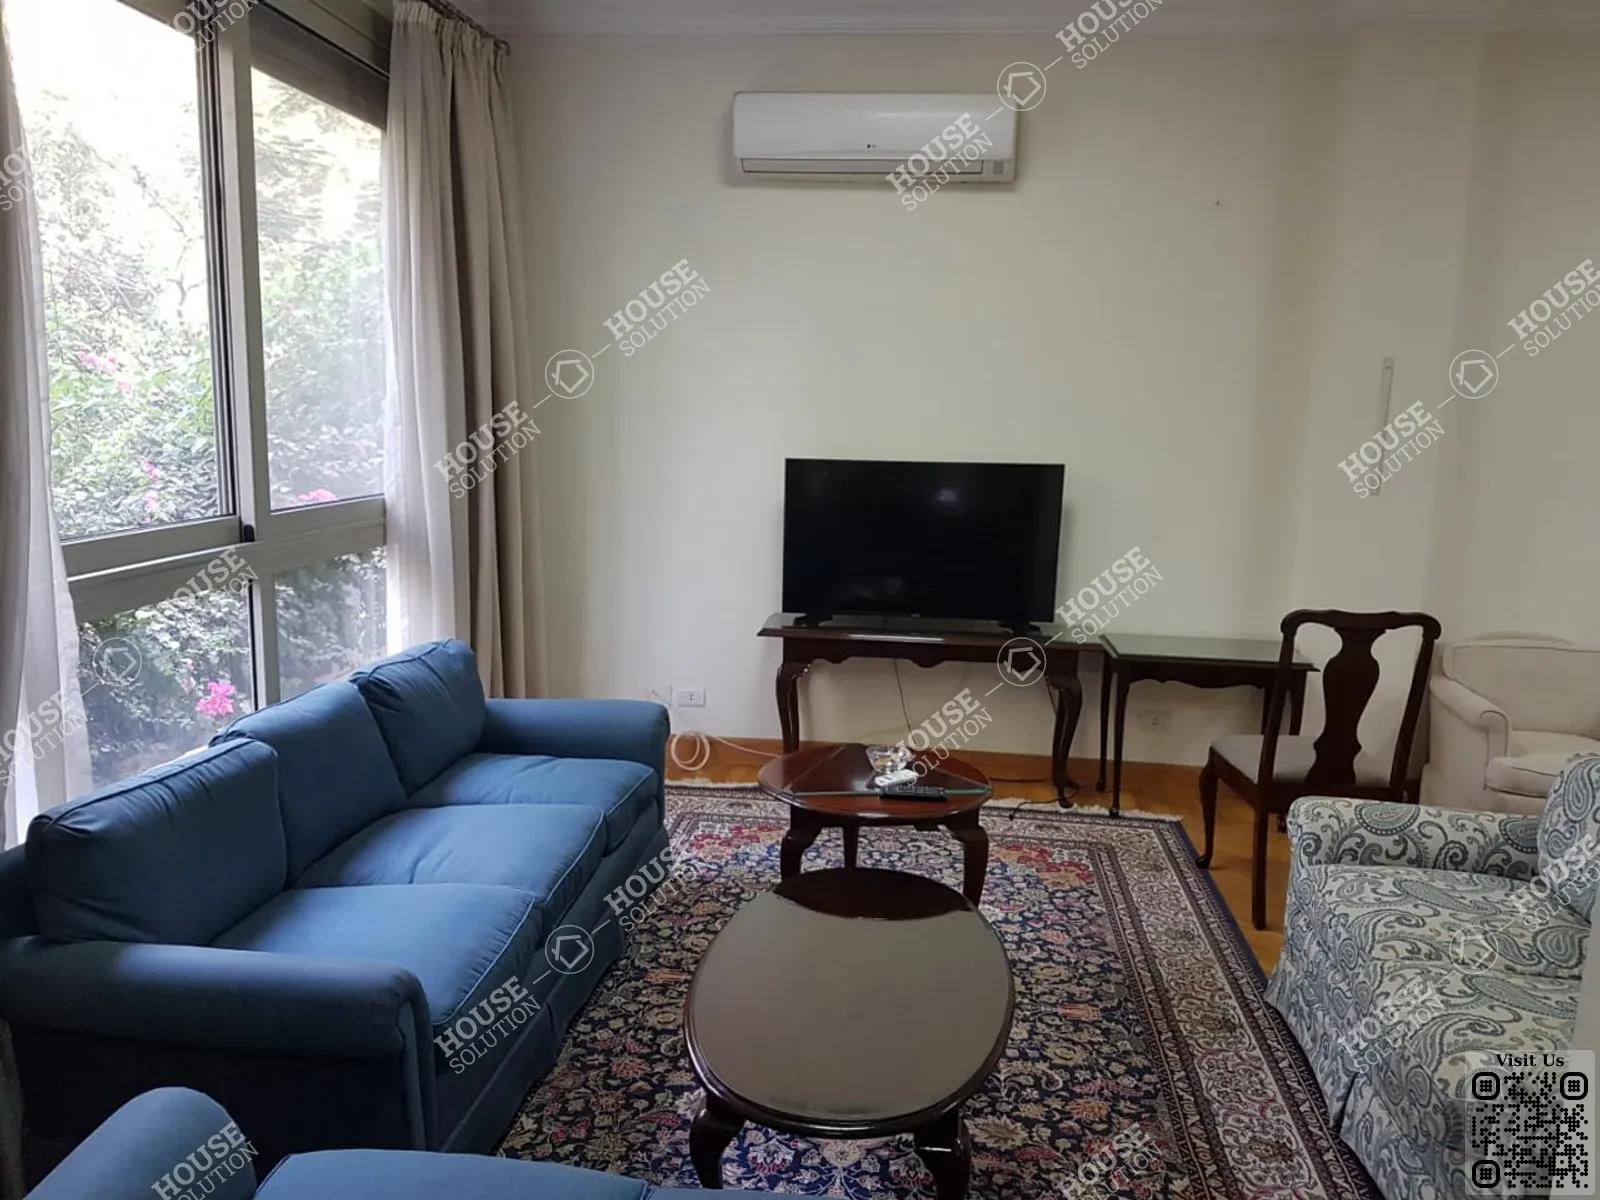 RECEPTION  @ Apartments For Rent In Maadi Maadi Sarayat Area: 185 m² consists of 2 Bedrooms 2 Bathrooms Furnished 5 stars #4351-0